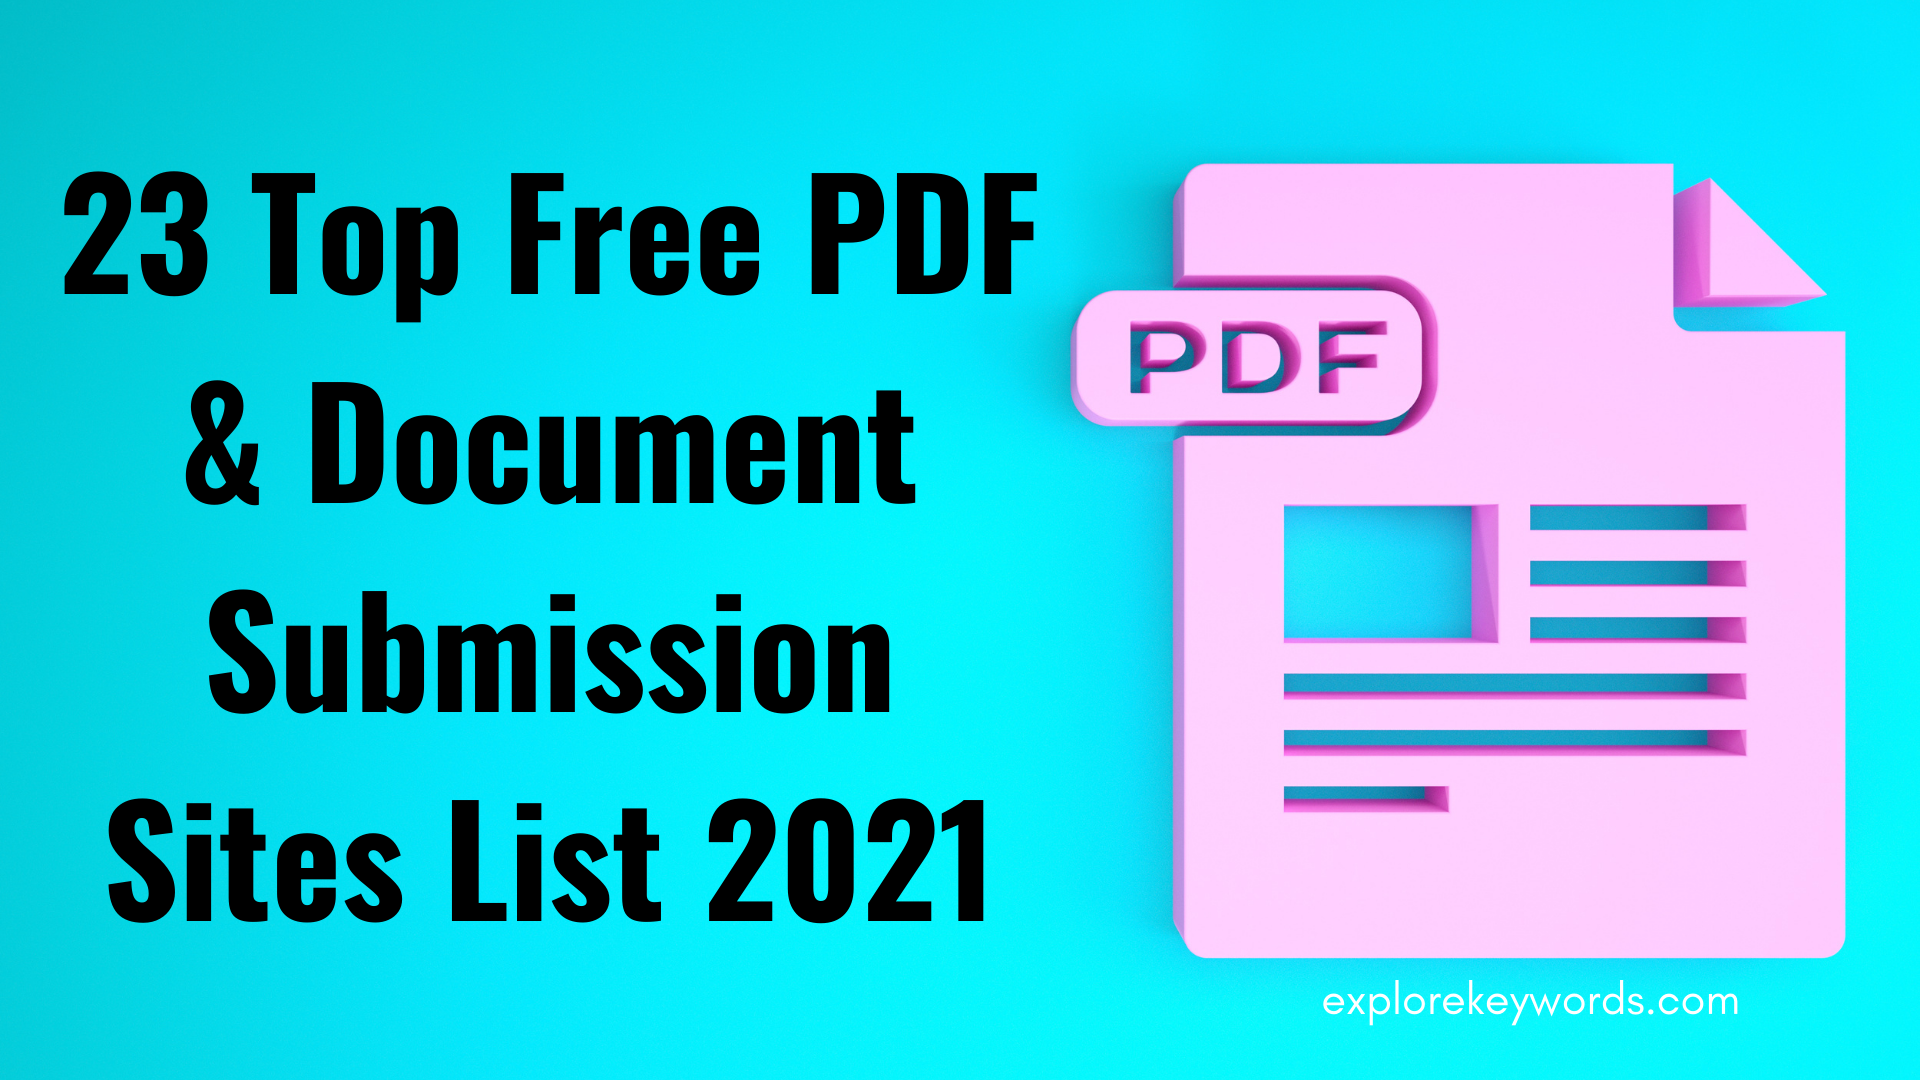 23 Top Free PDF & Document Submission Sites List 2021